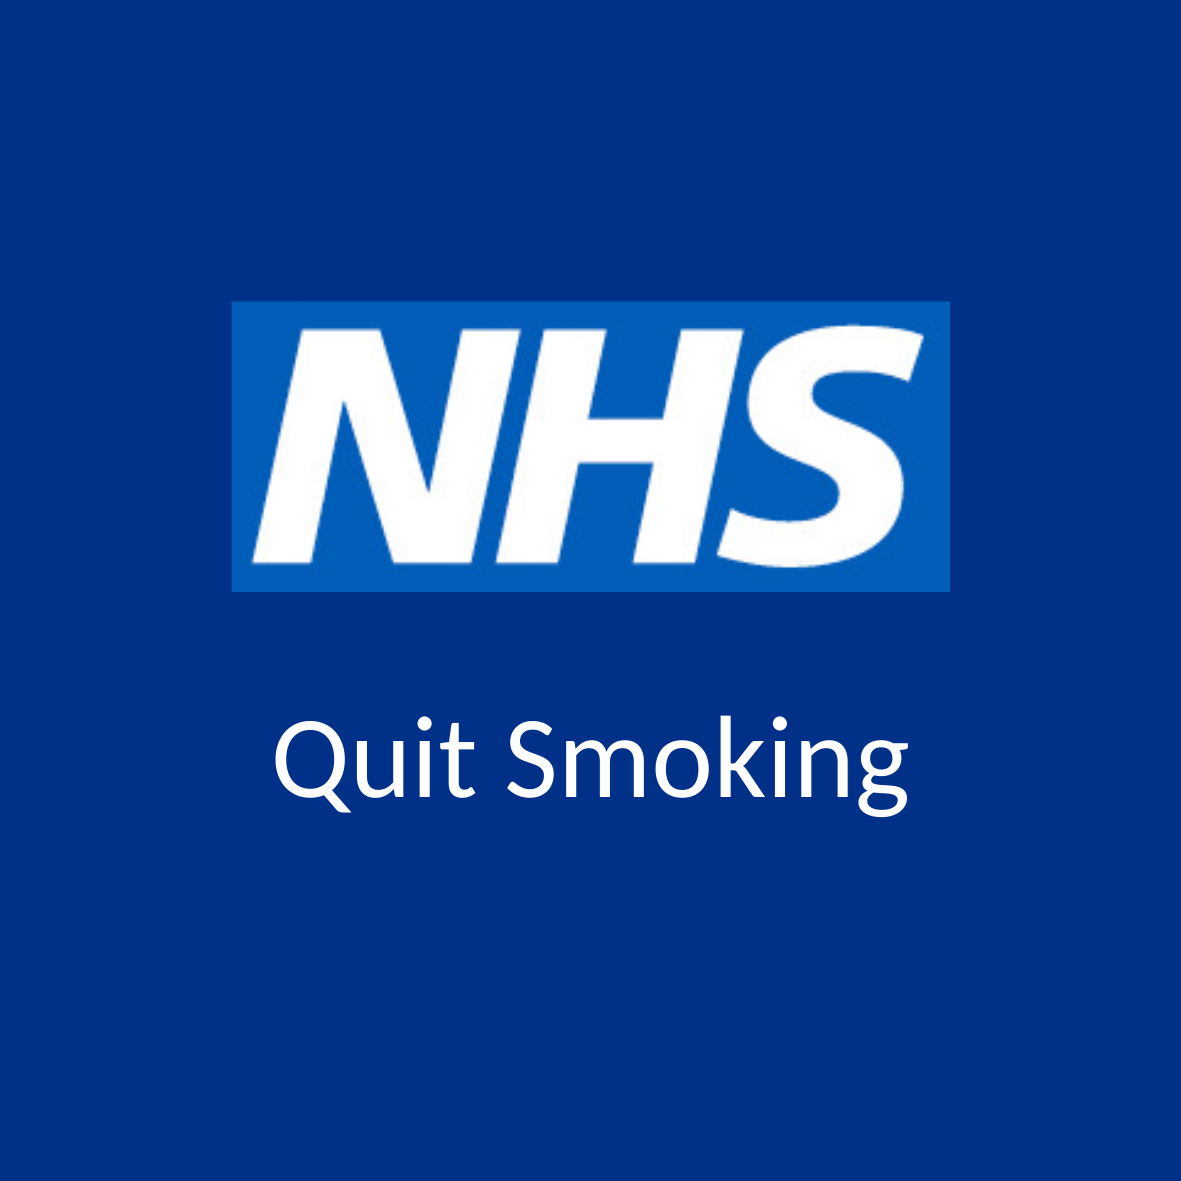 NHS Logo With Words 'Quit Smoking'